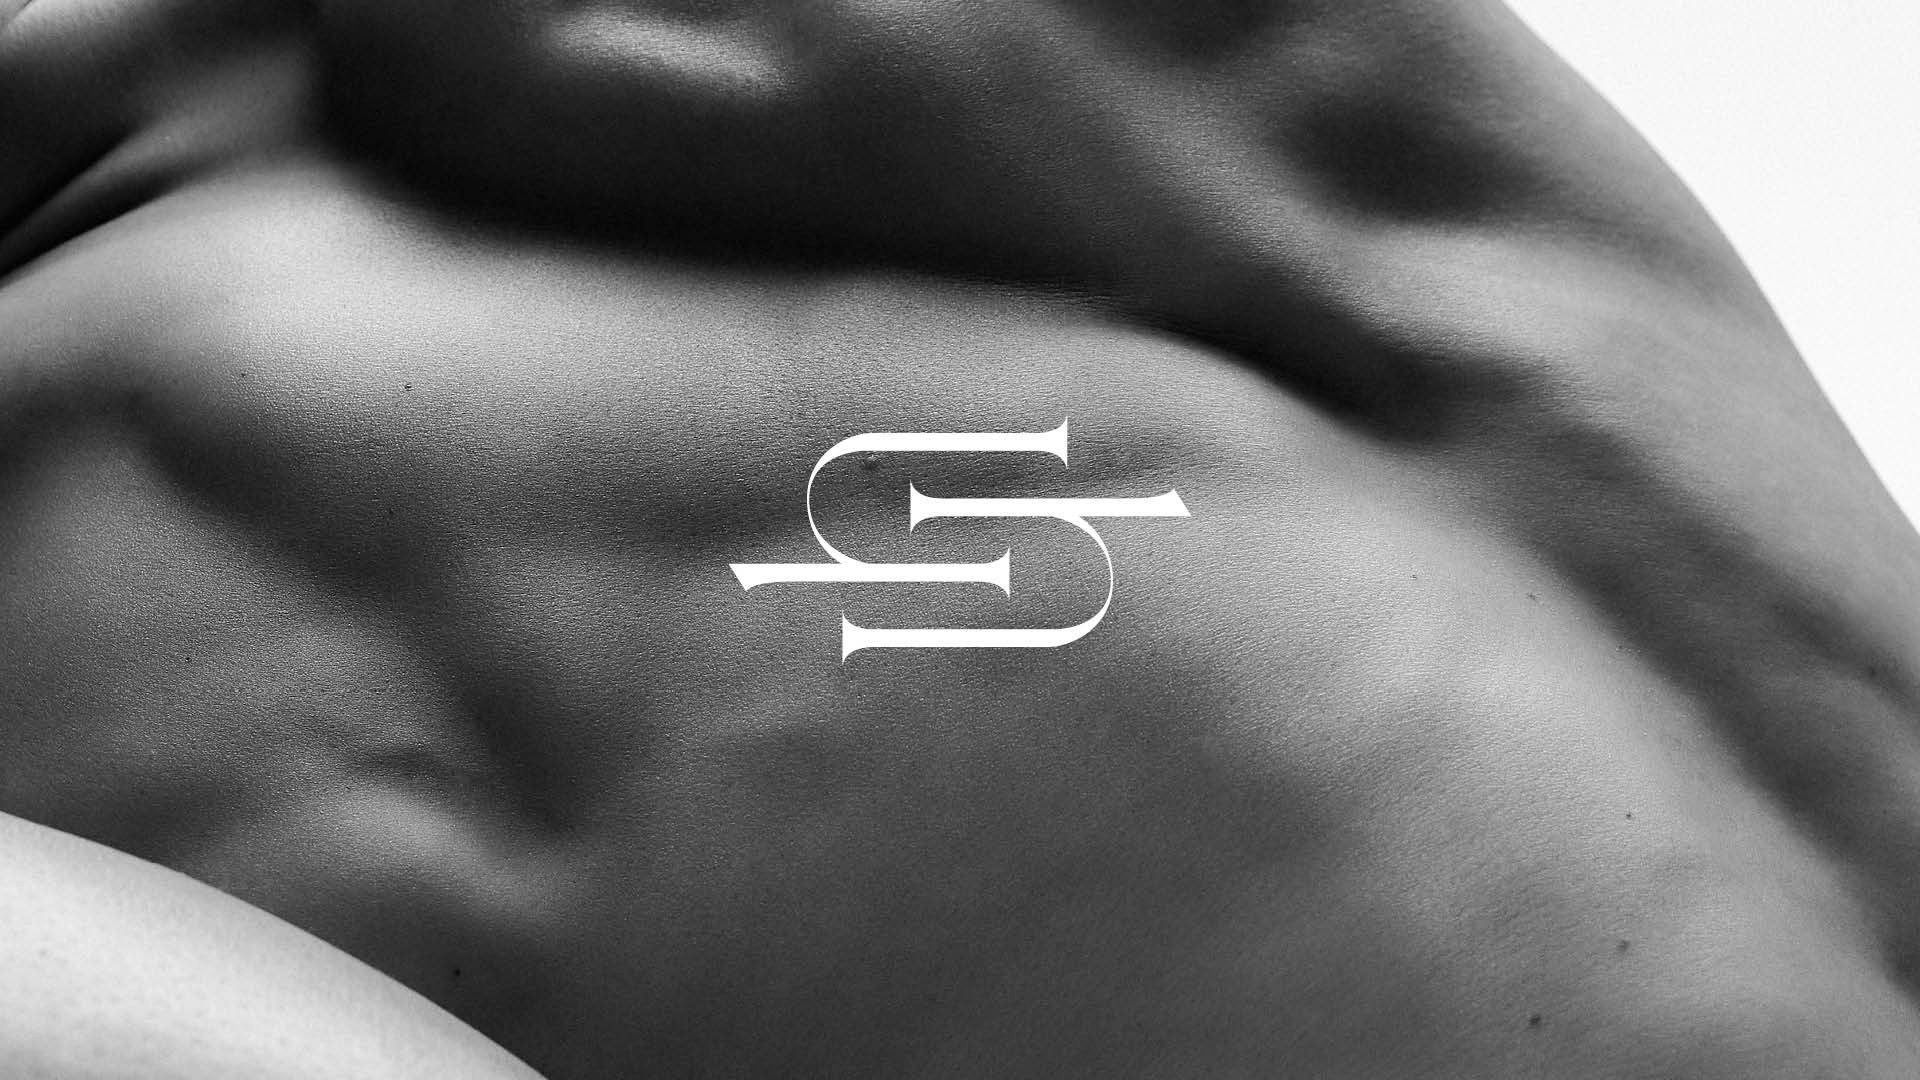 person, skin, back, body part, symbol, number, text